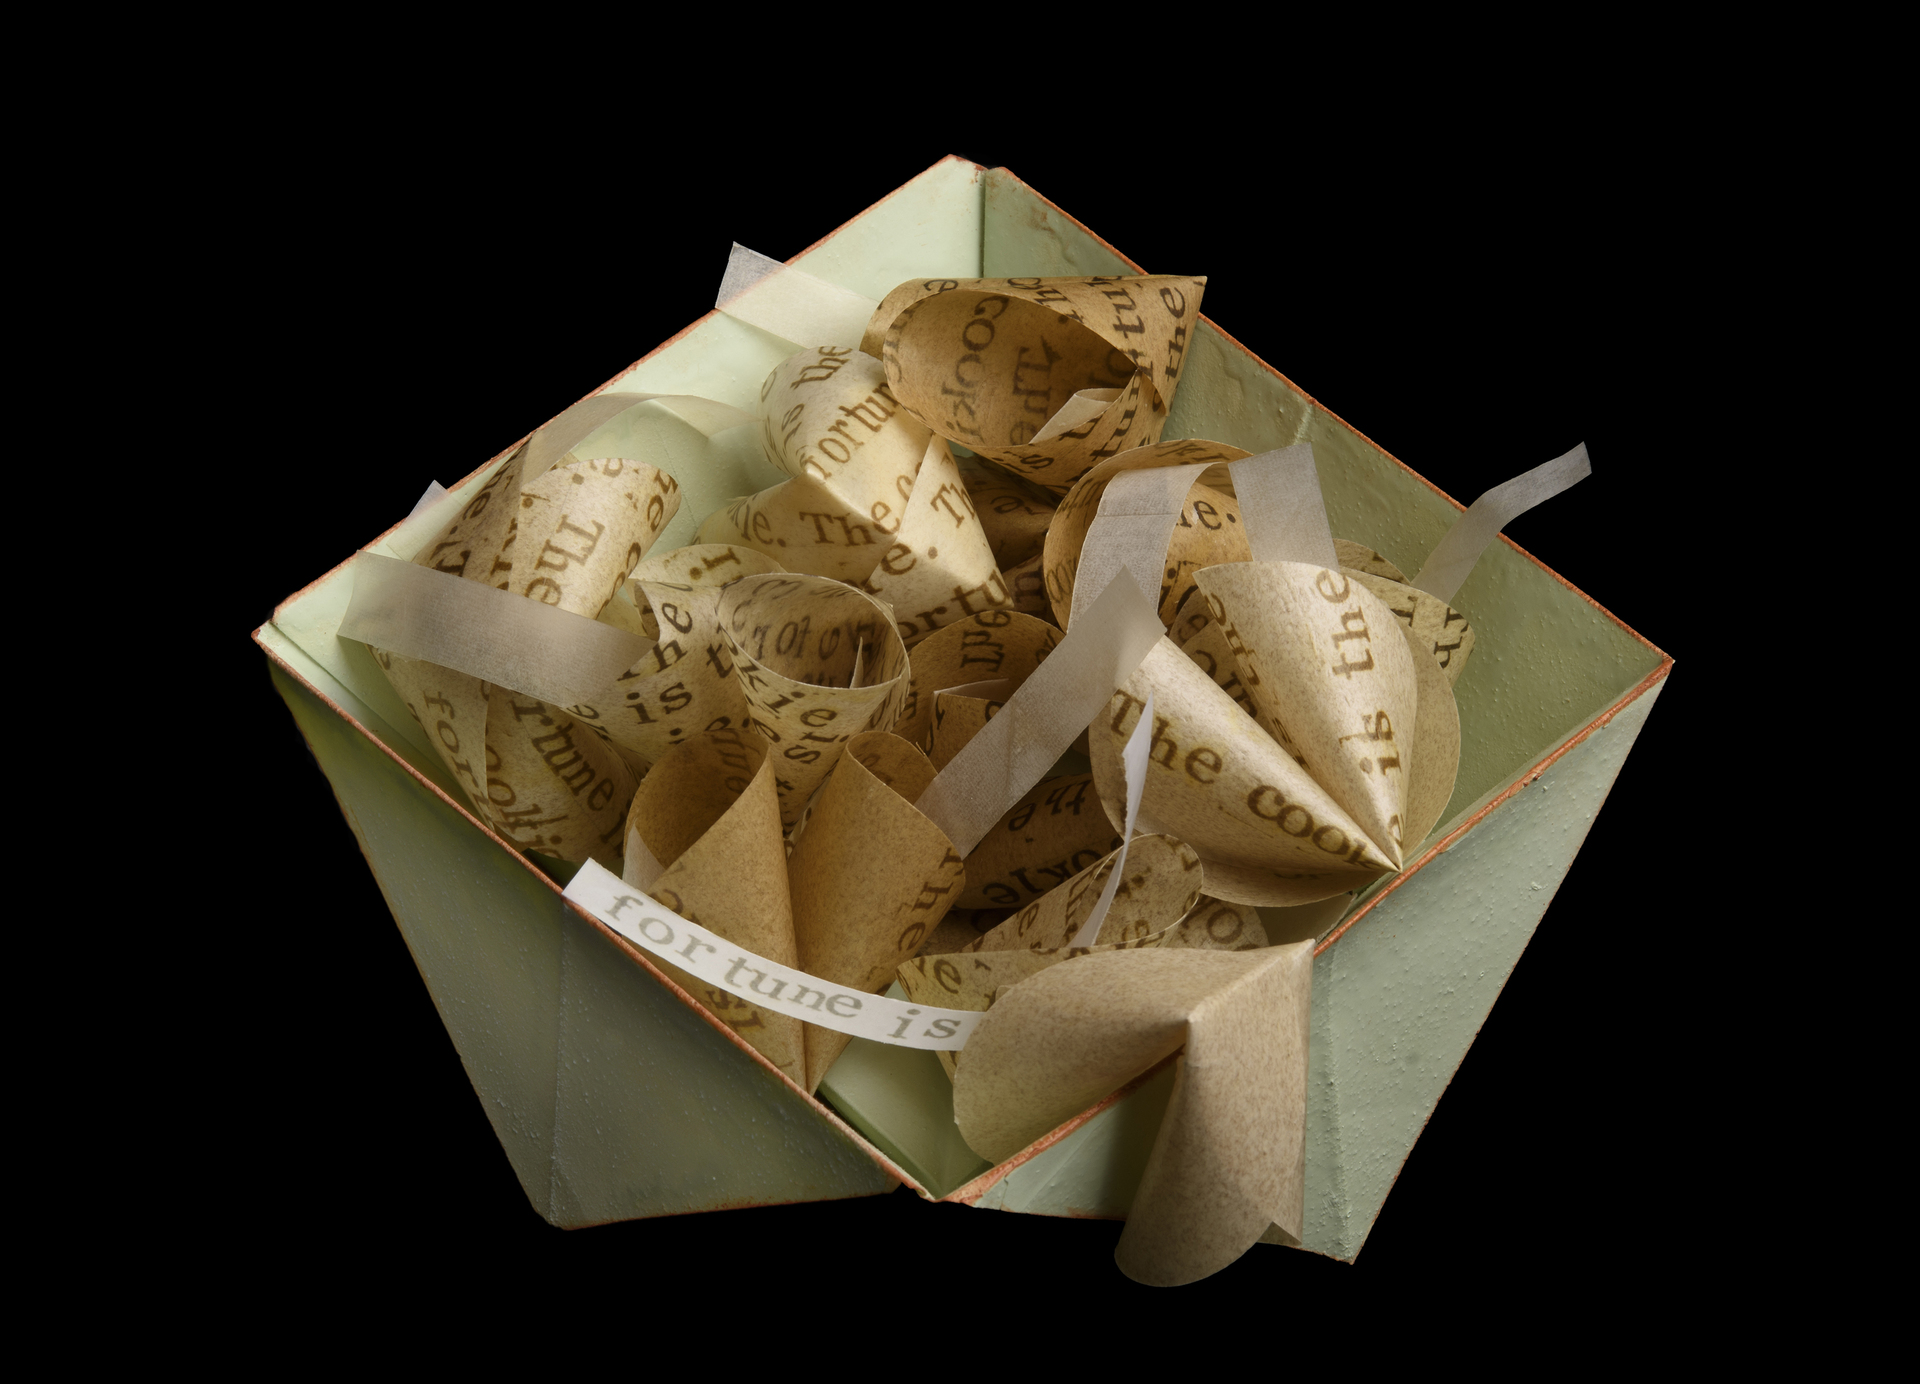 a mint green, paper oragami bowl holds multiple fortune cookies with handpritned messages on them that say, "The fortune is the cookie. The cookie is the fortune," on both the fortune cookie and the paper inside. 